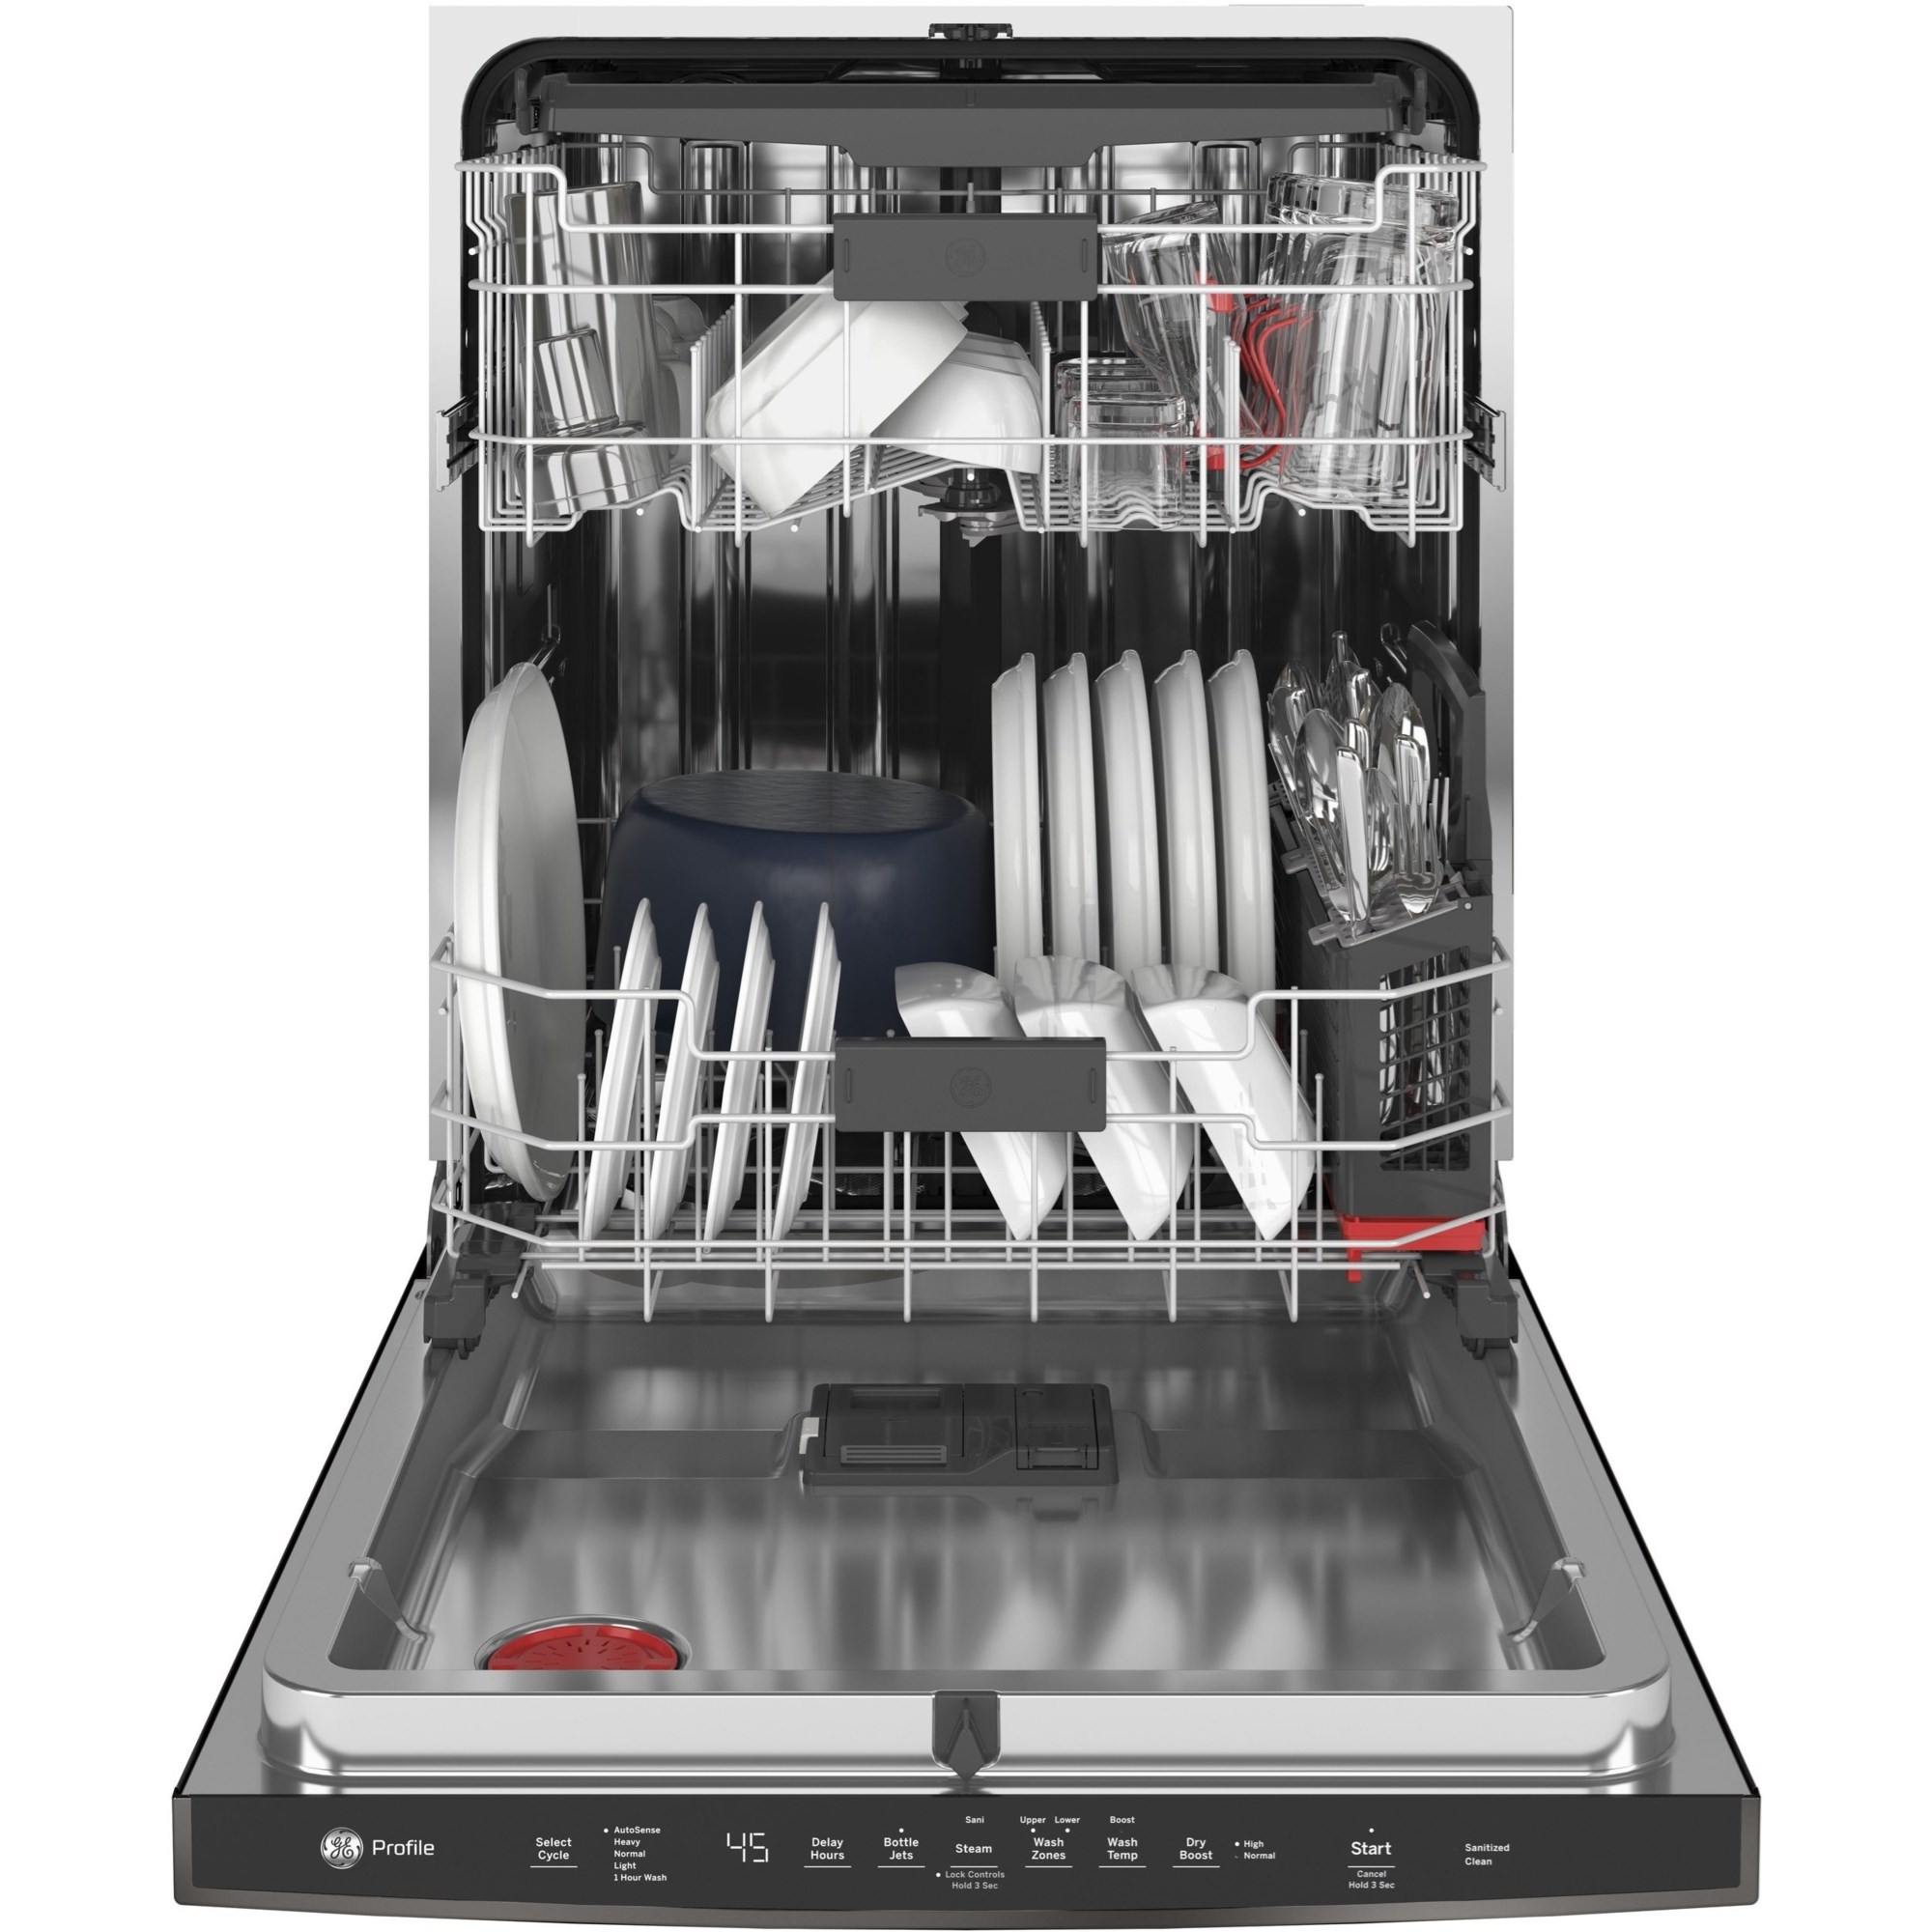 What Are Bottle Jets in a Dishwasher?